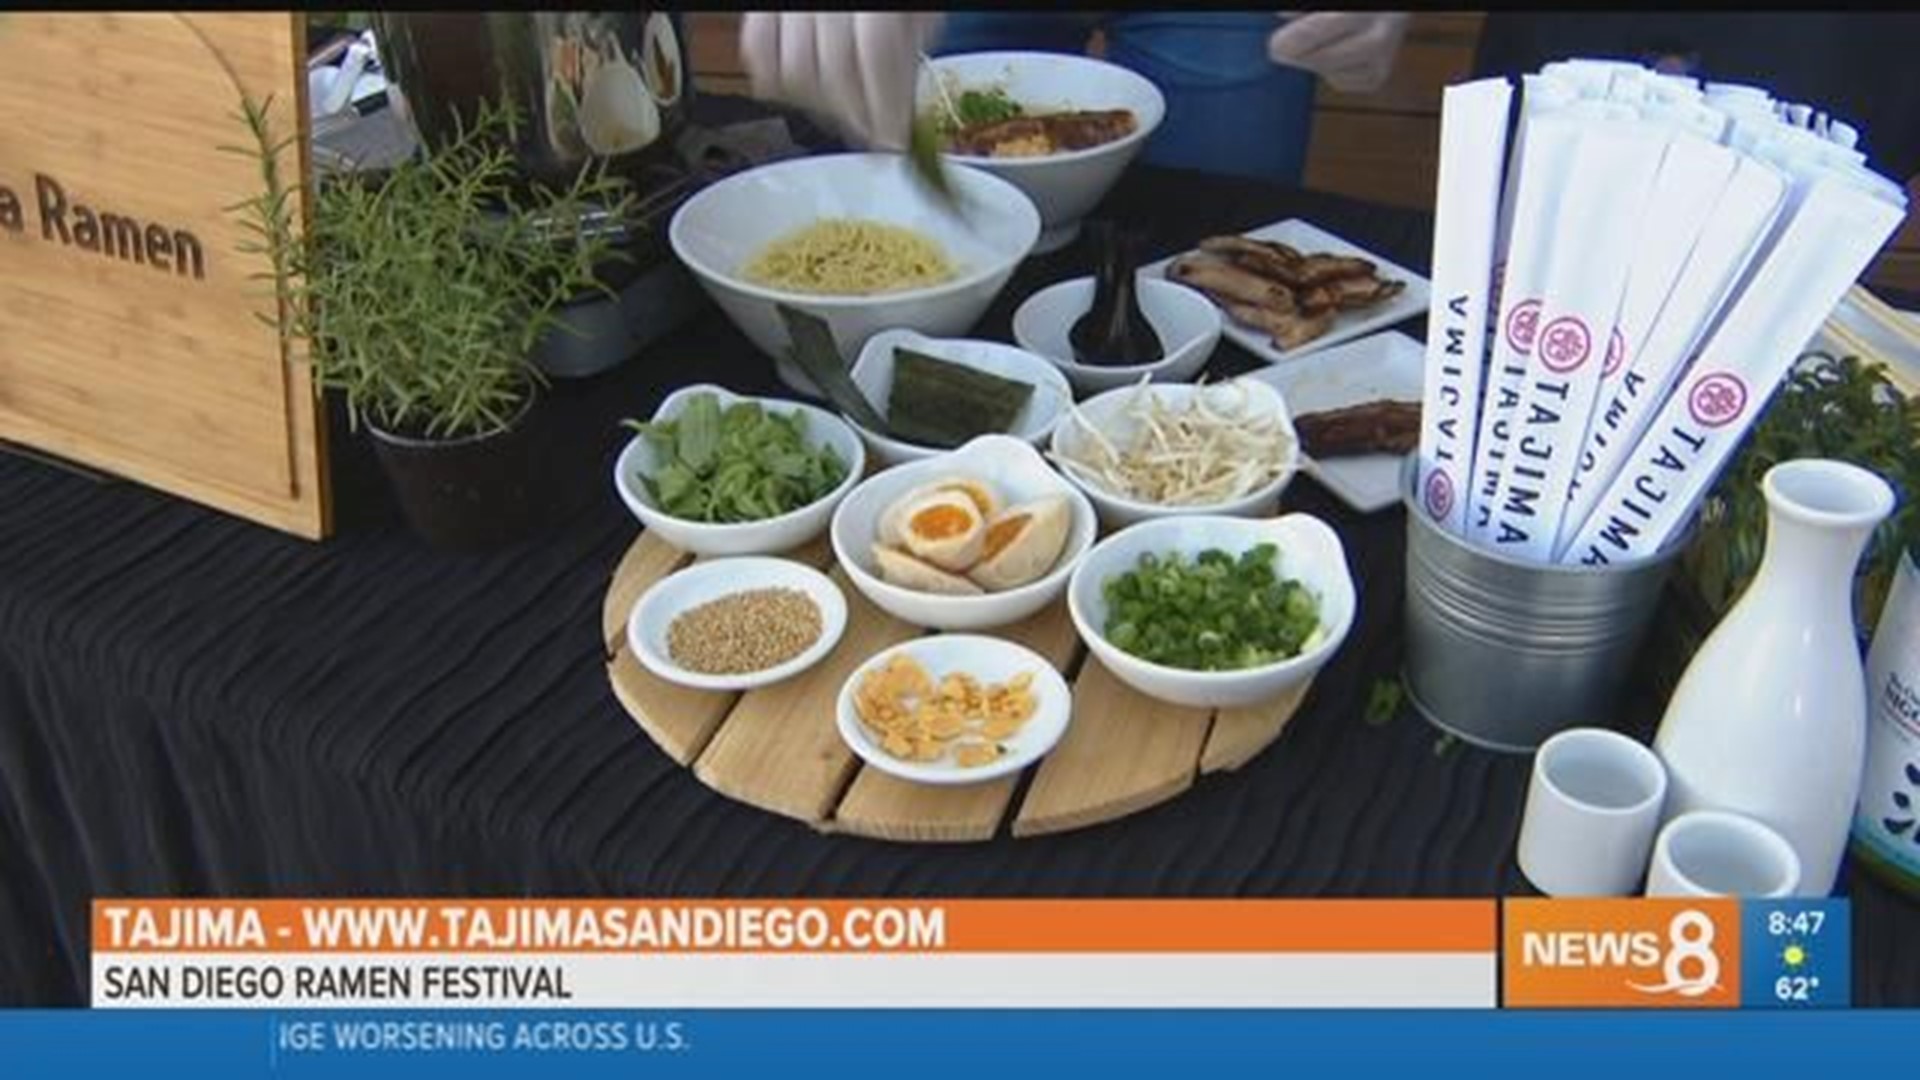 San Diego Ramen Festival features a variety of dishes and activities